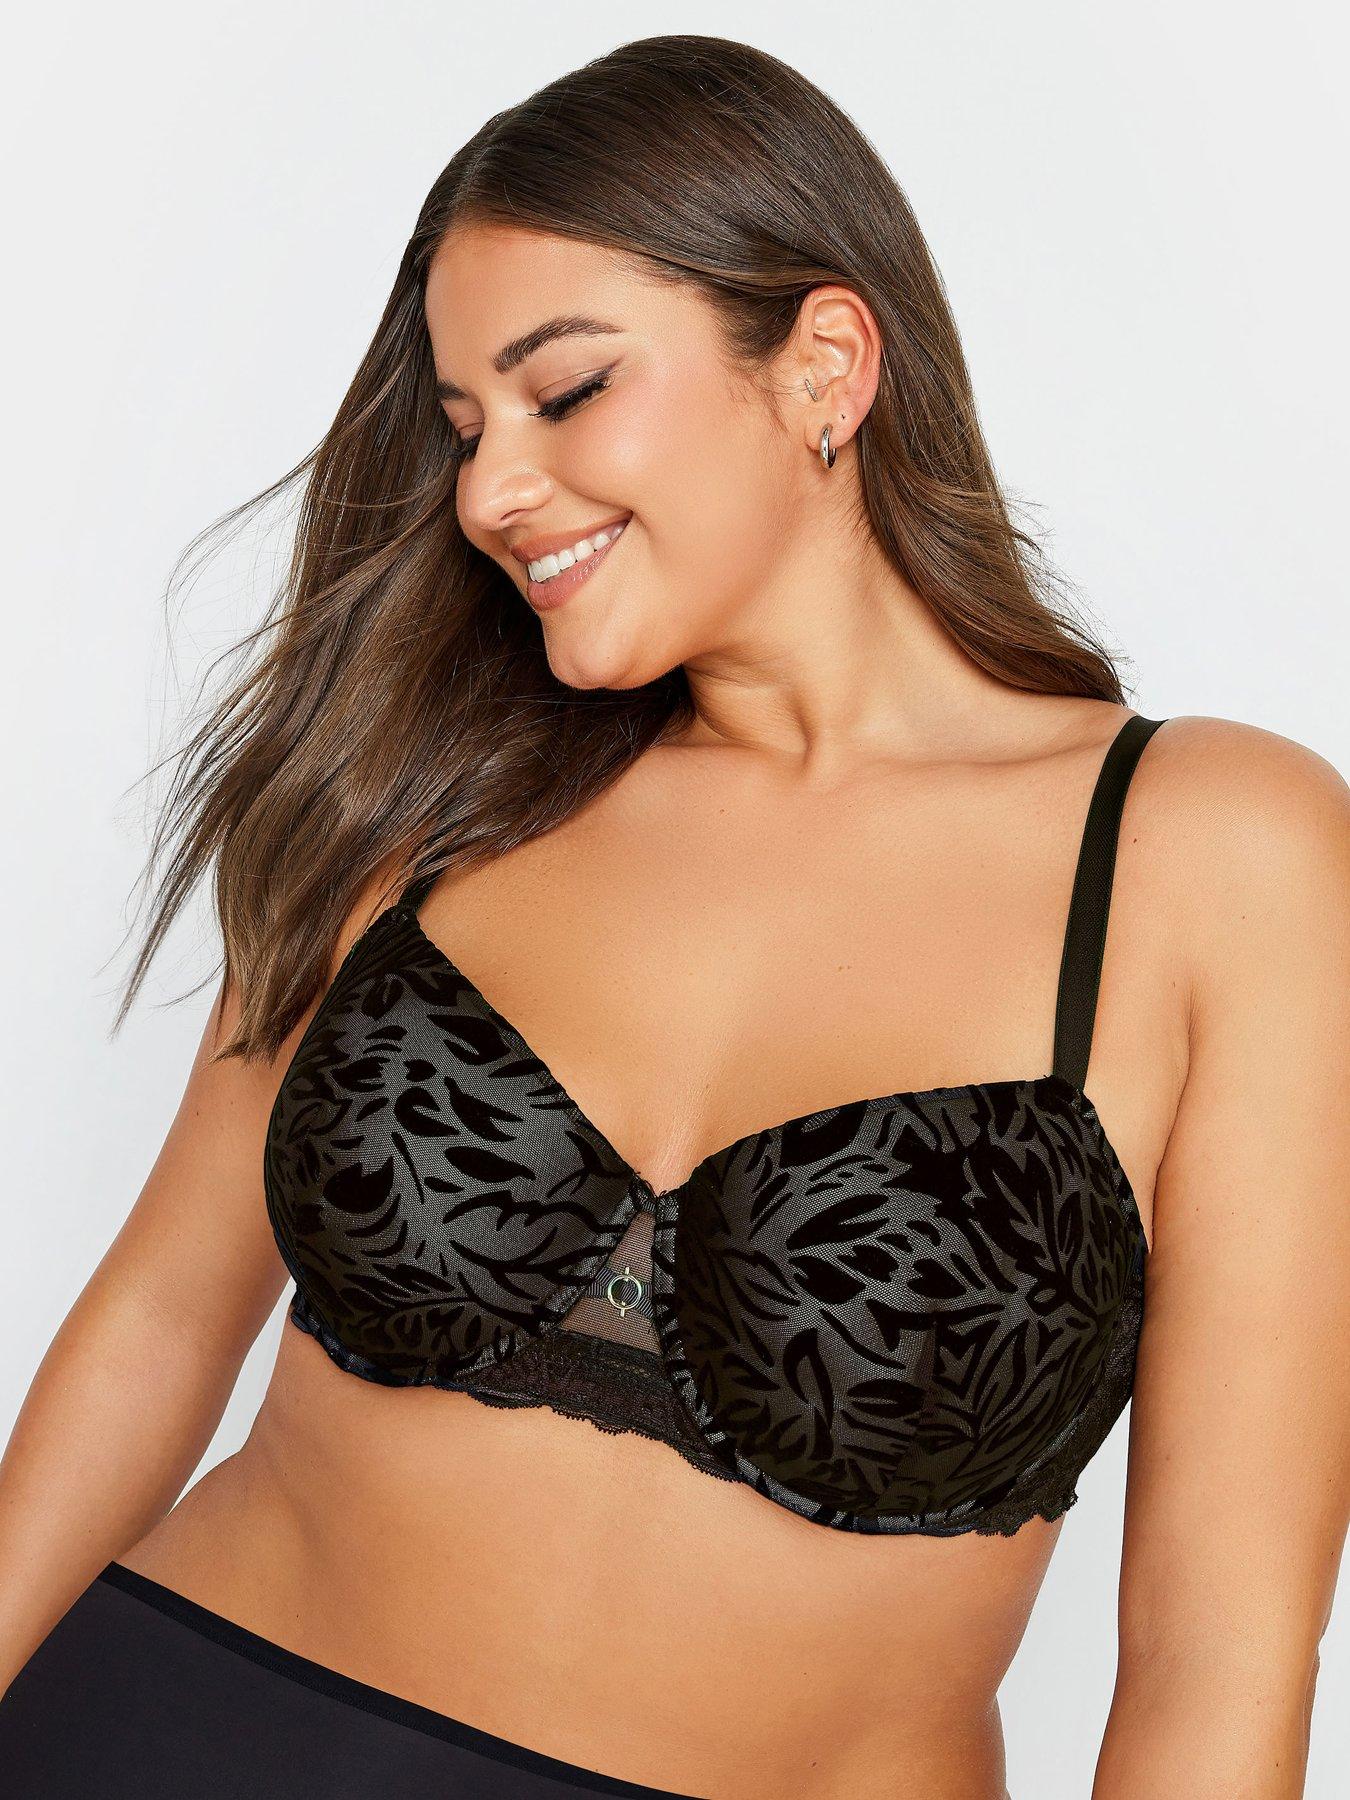 Plus Size Full-Coverage Bra for Women Comfortable Lace Breathable Bra  Underwear No Rims Present for Women Up to 65% off